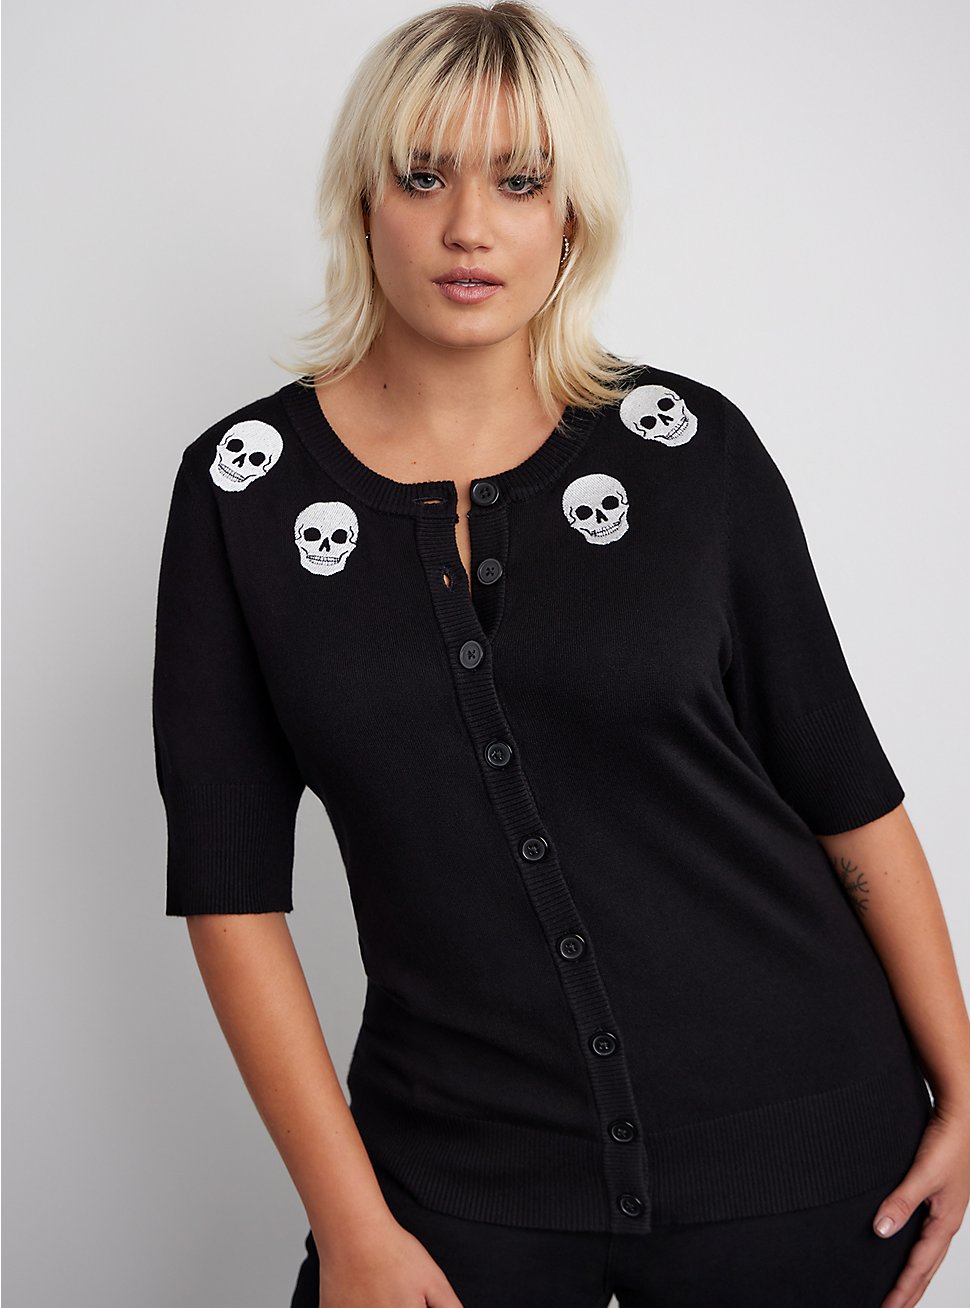 Cropped Cardigan Sweater - Skull Embroidery Black , BLACK, hi-res